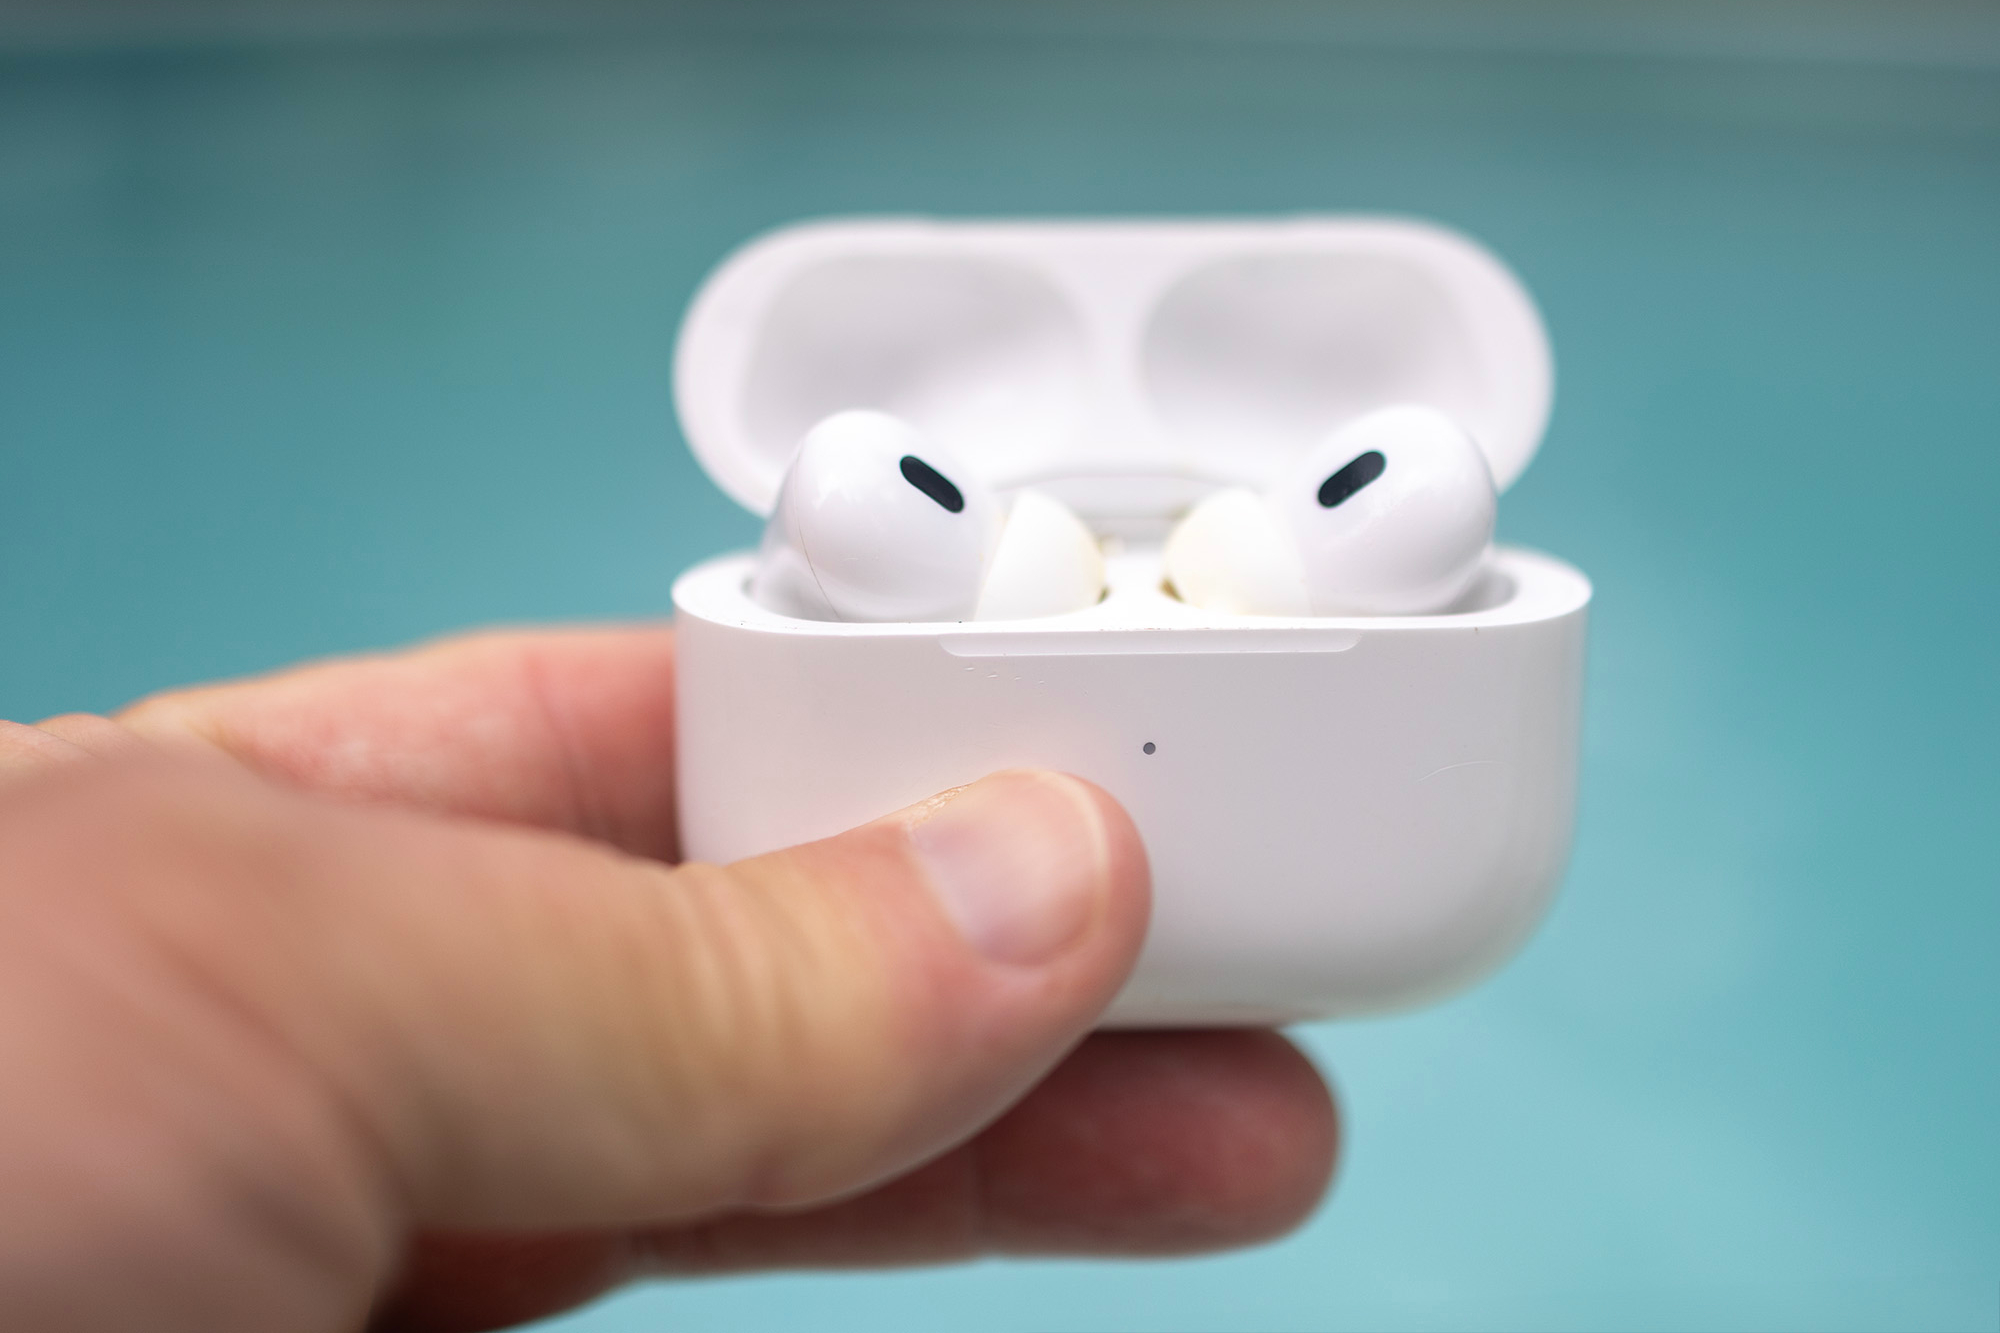 A pair of Apple AirPods Pro in an open case with a swimming pool in the background.